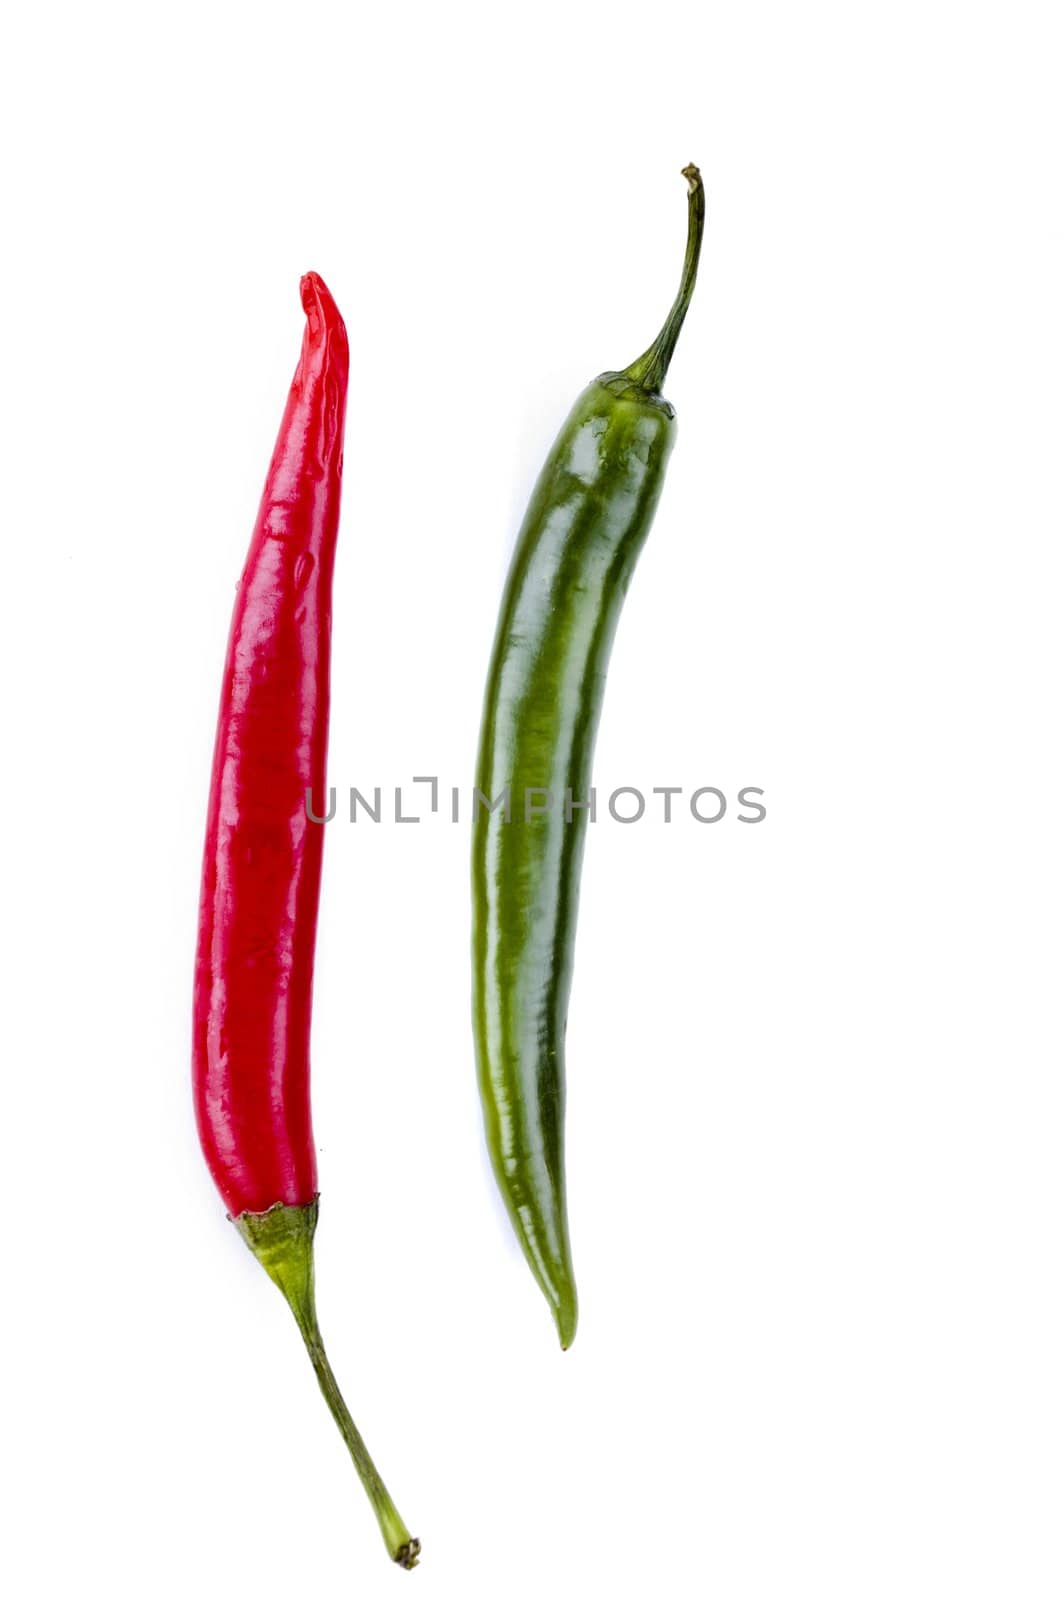 Red and green chili peppers on white background